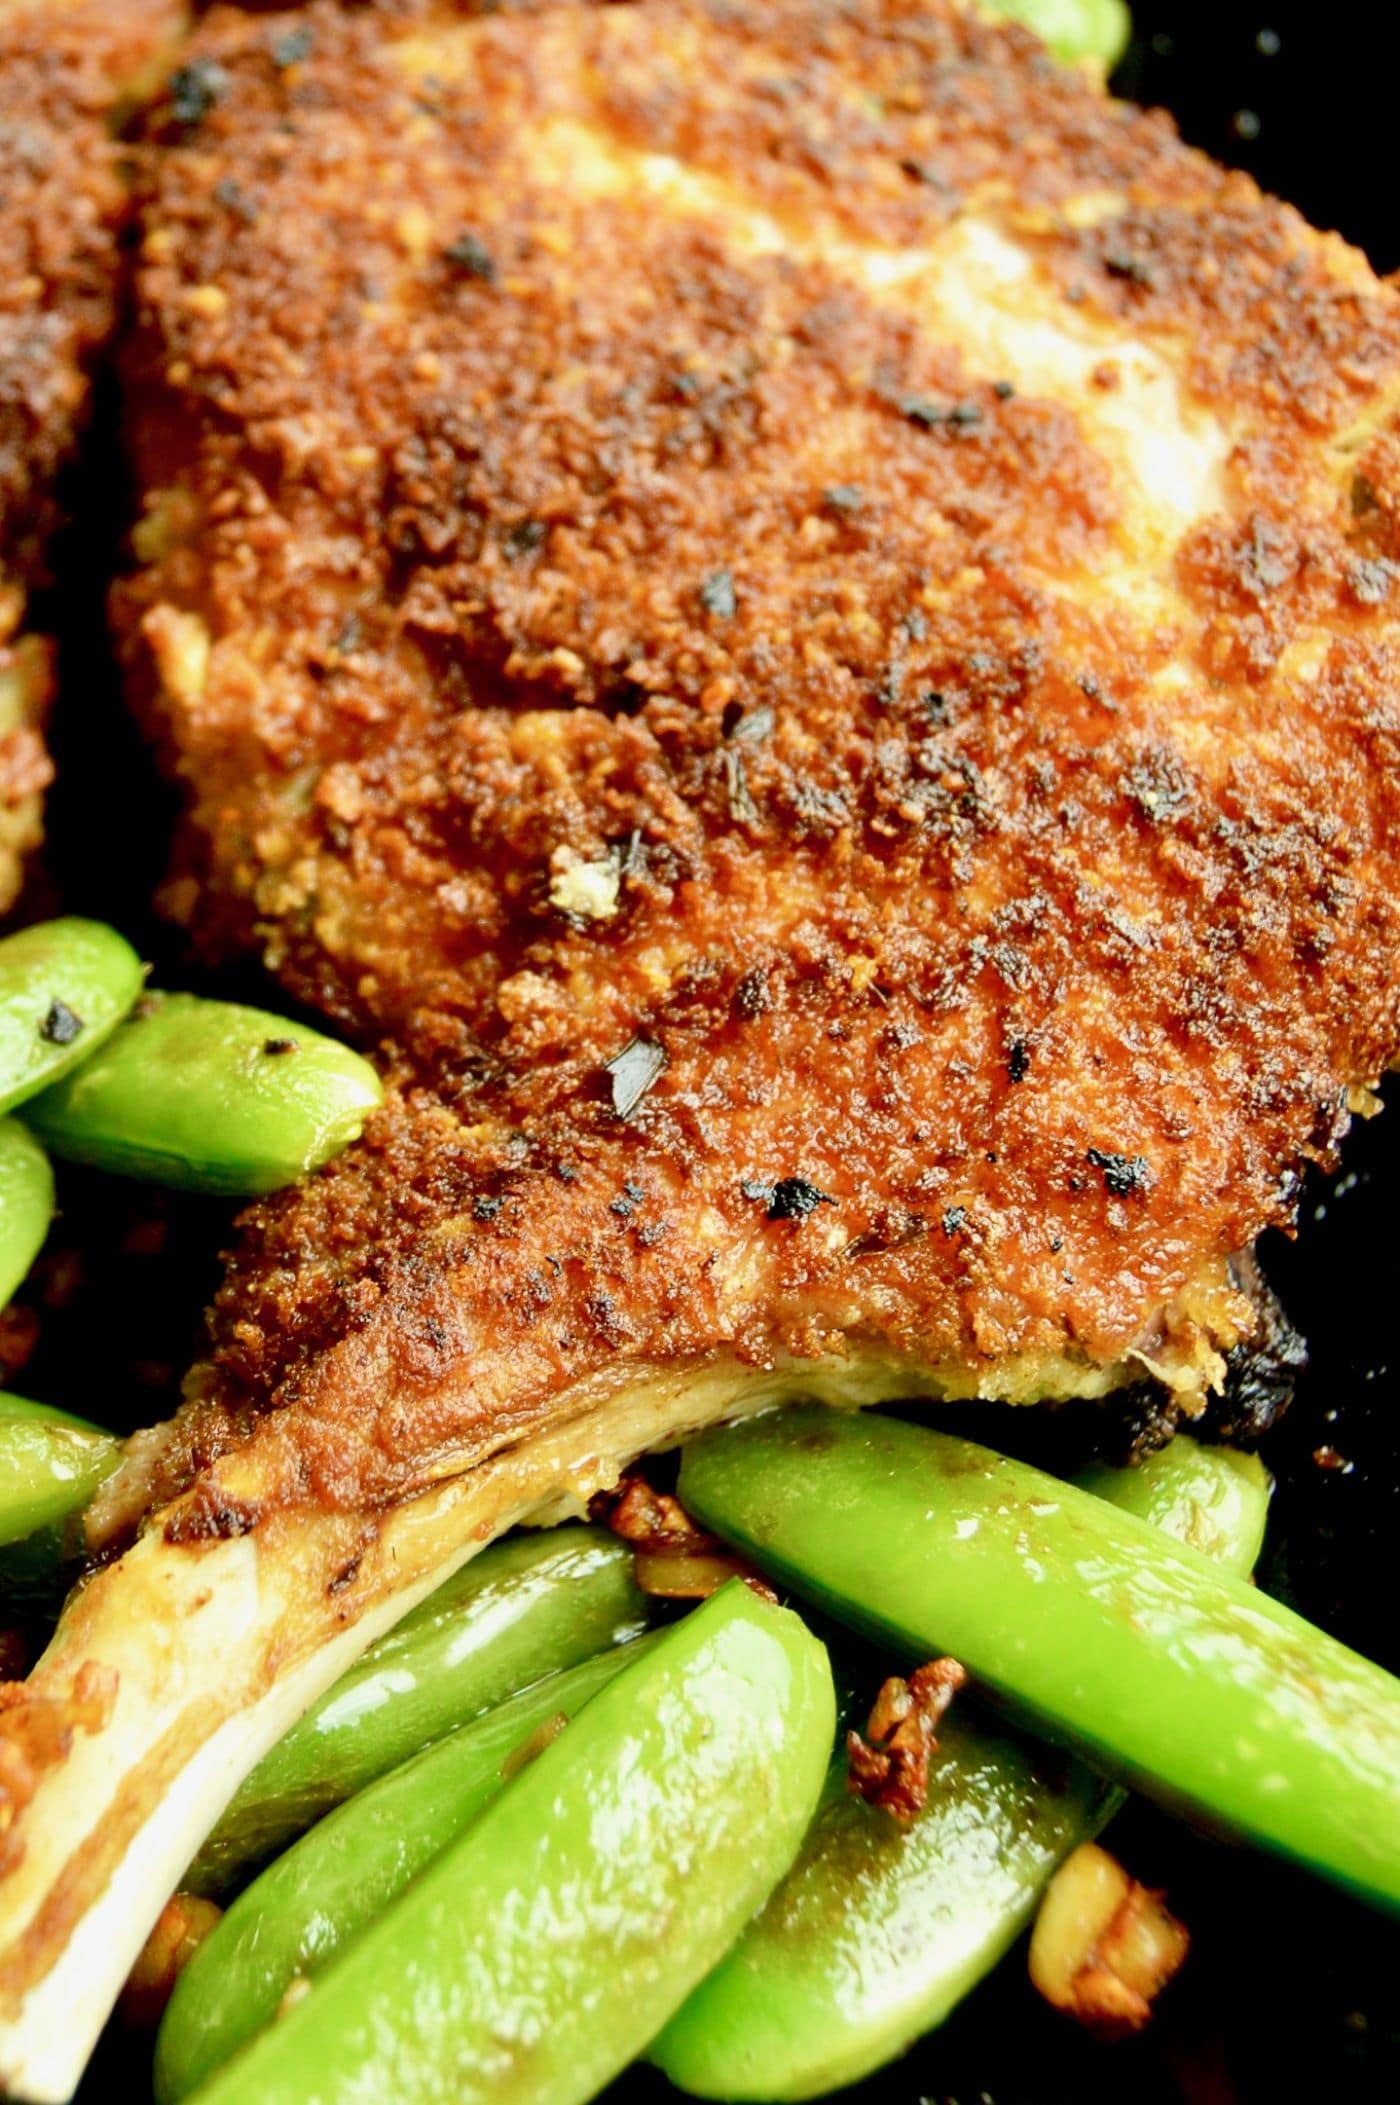 Pork Chops coated in Panko and Parmesan served in a cast iron skillet with sugar snap peas!